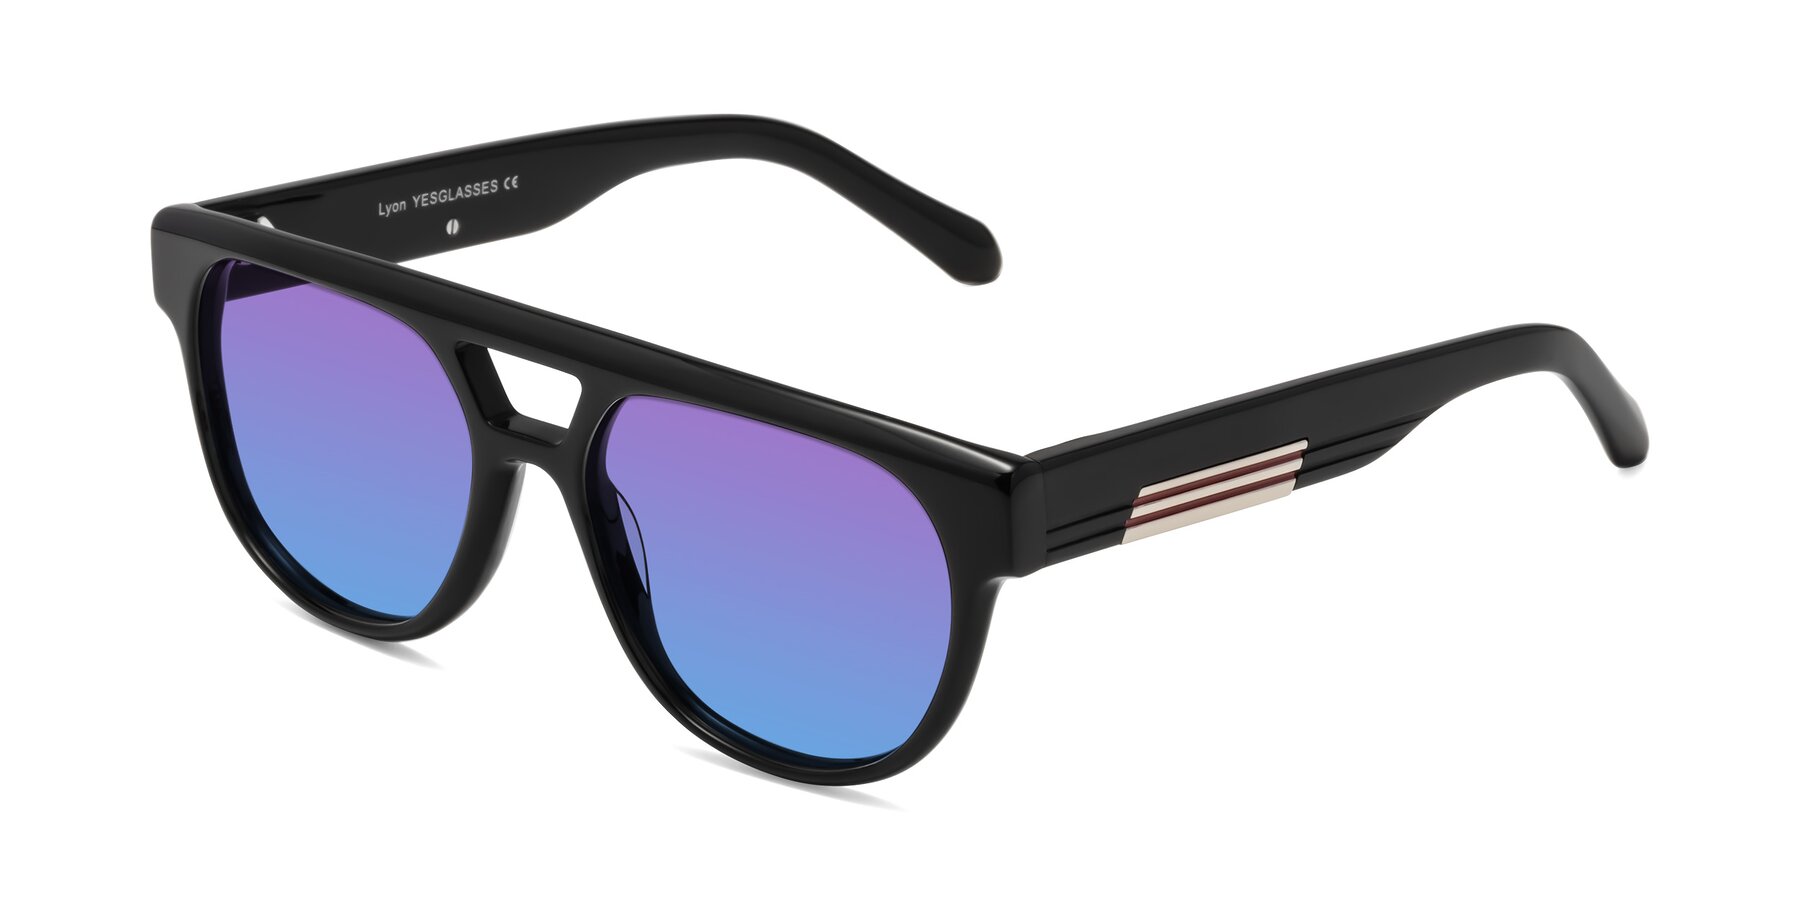 Angle of Lyon in Black with Purple / Blue Gradient Lenses